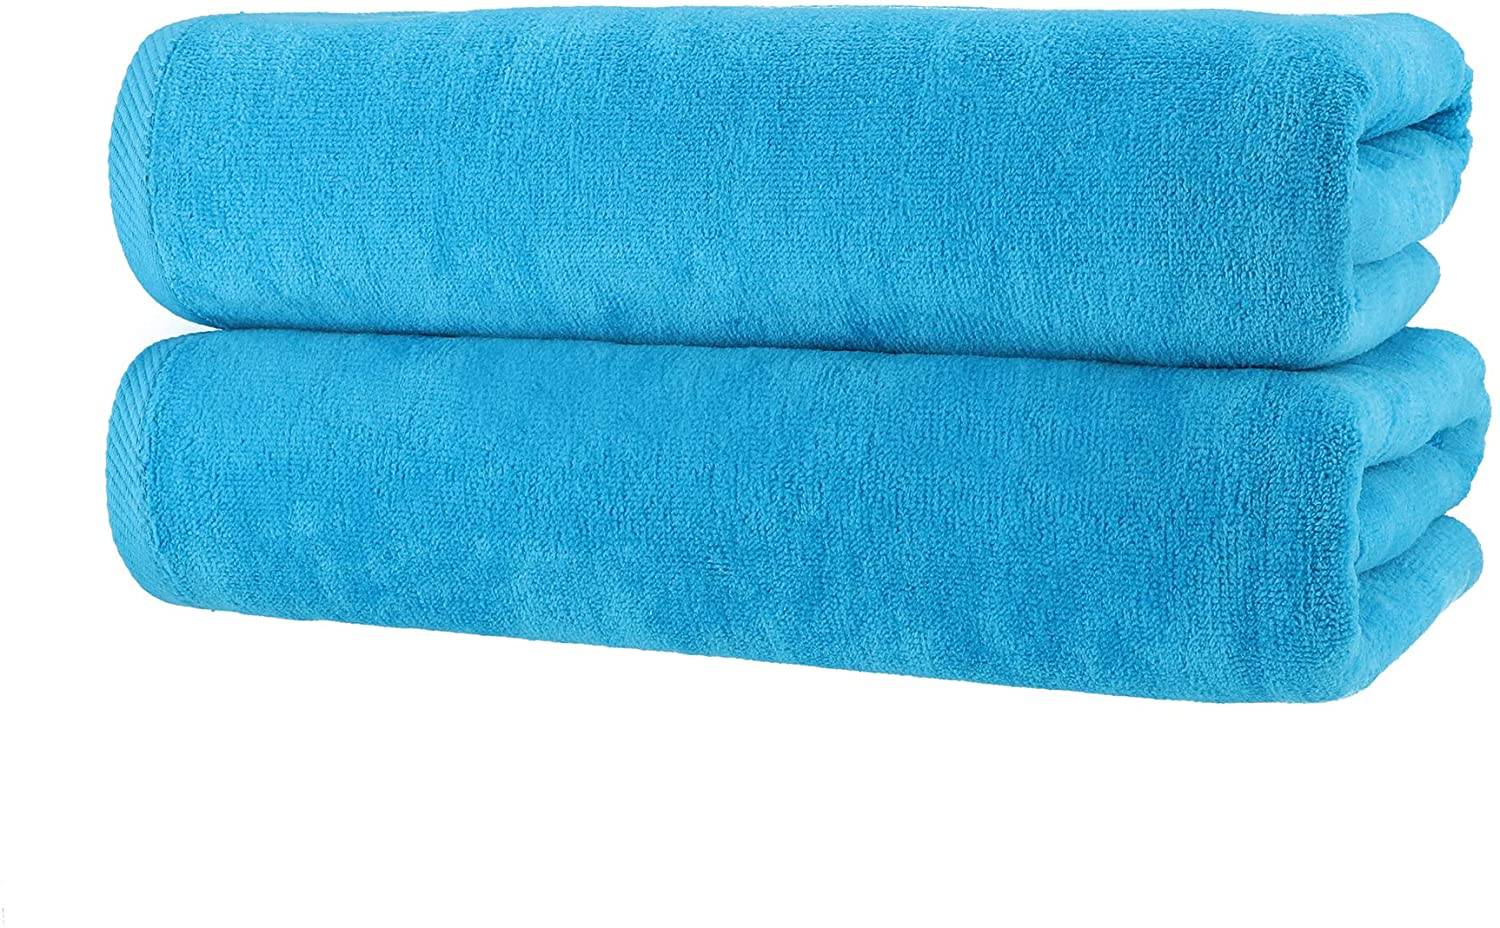 OEM Factory for Towel Bag - Royal Comfort and soft Solid Color Velour Terry Beach Towel with bright colors, made of 100% cotton.  – SUPER